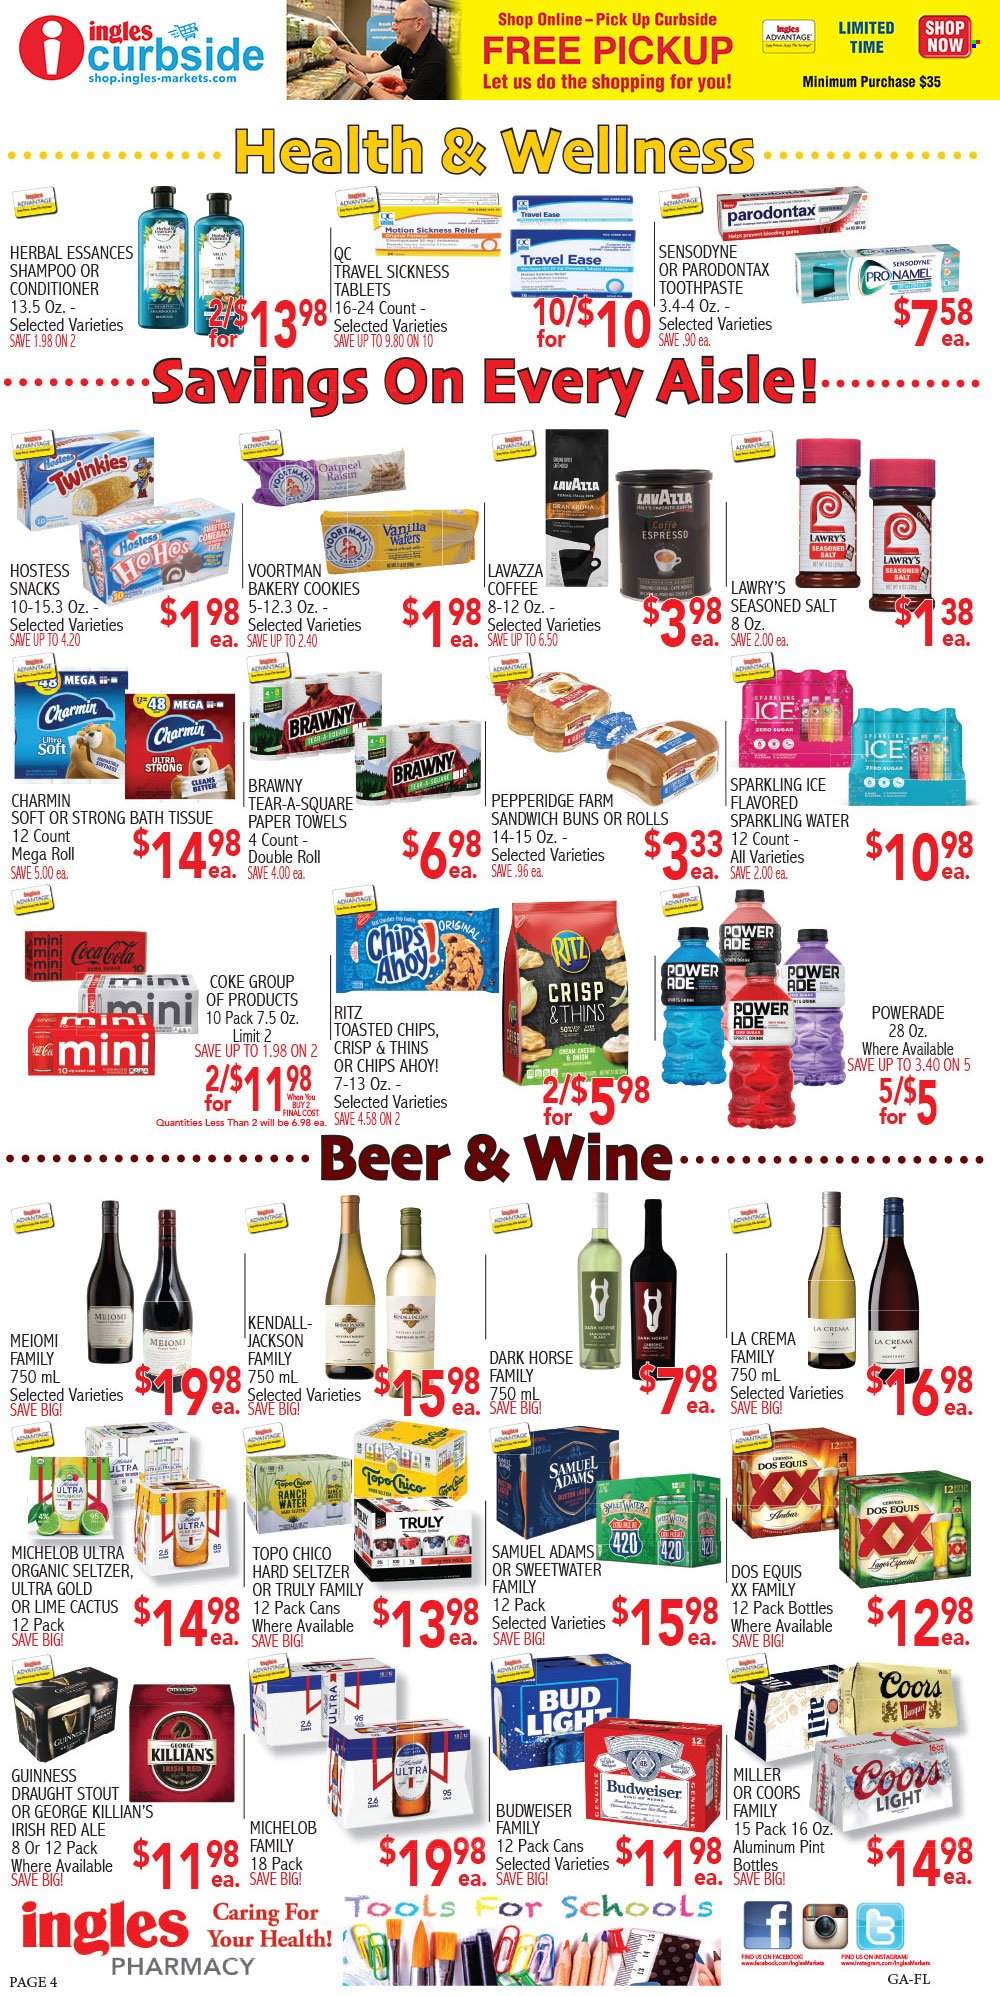 thumbnail - Ingles Flyer - 03/22/2023 - 03/28/2023 - Sales products - buns, sandwich, cookies, wafers, snack, Chips Ahoy!, RITZ, chips, Thins, oatmeal, salt, Coca-Cola, Powerade, Coke, sparkling water, water, coffee, Lavazza, wine, Hard Seltzer, beer, Bud Light, Guinness, Miller, Lager, bath tissue, kitchen towels, paper towels, Charmin, shampoo, toothpaste, Sensodyne, conditioner, cactus, Budweiser, Coors, Dos Equis, Michelob. Page 4.